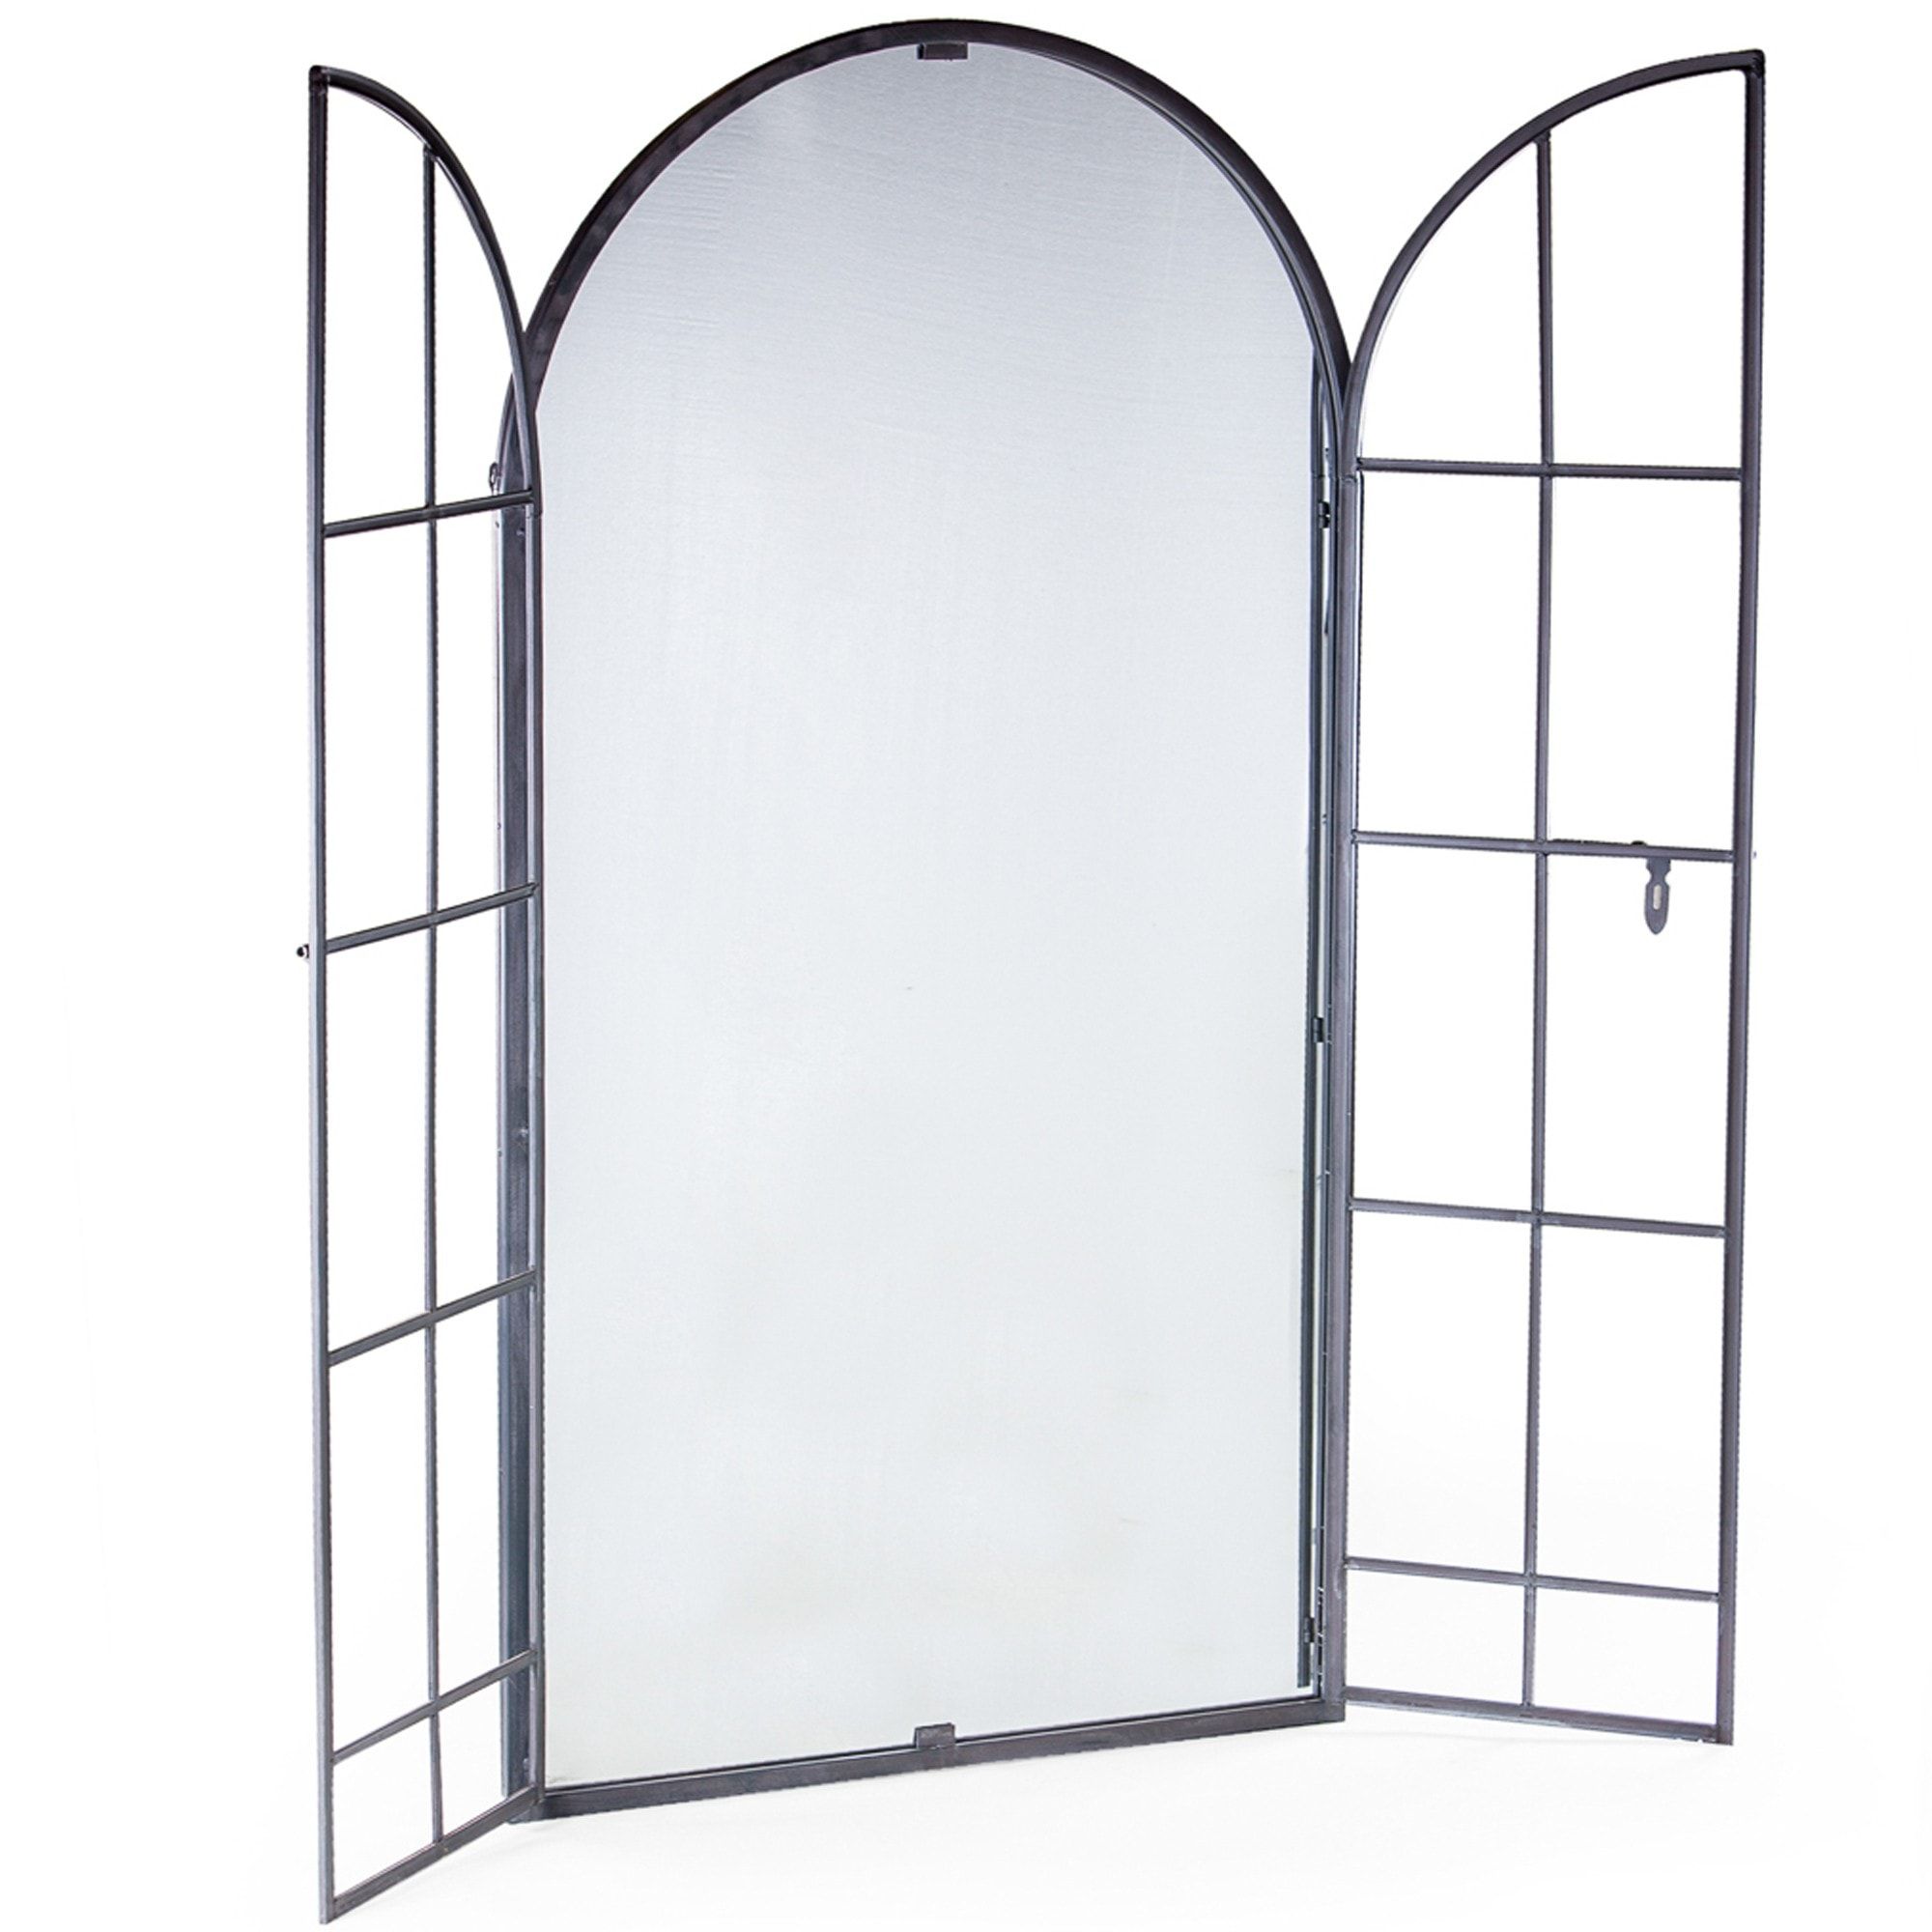 Antiqued Lead Grey Iron Large Arch Window Metal Mirror | Metal Mirror Within Metal Arch Window Wall Mirrors (Photo 5 of 15)